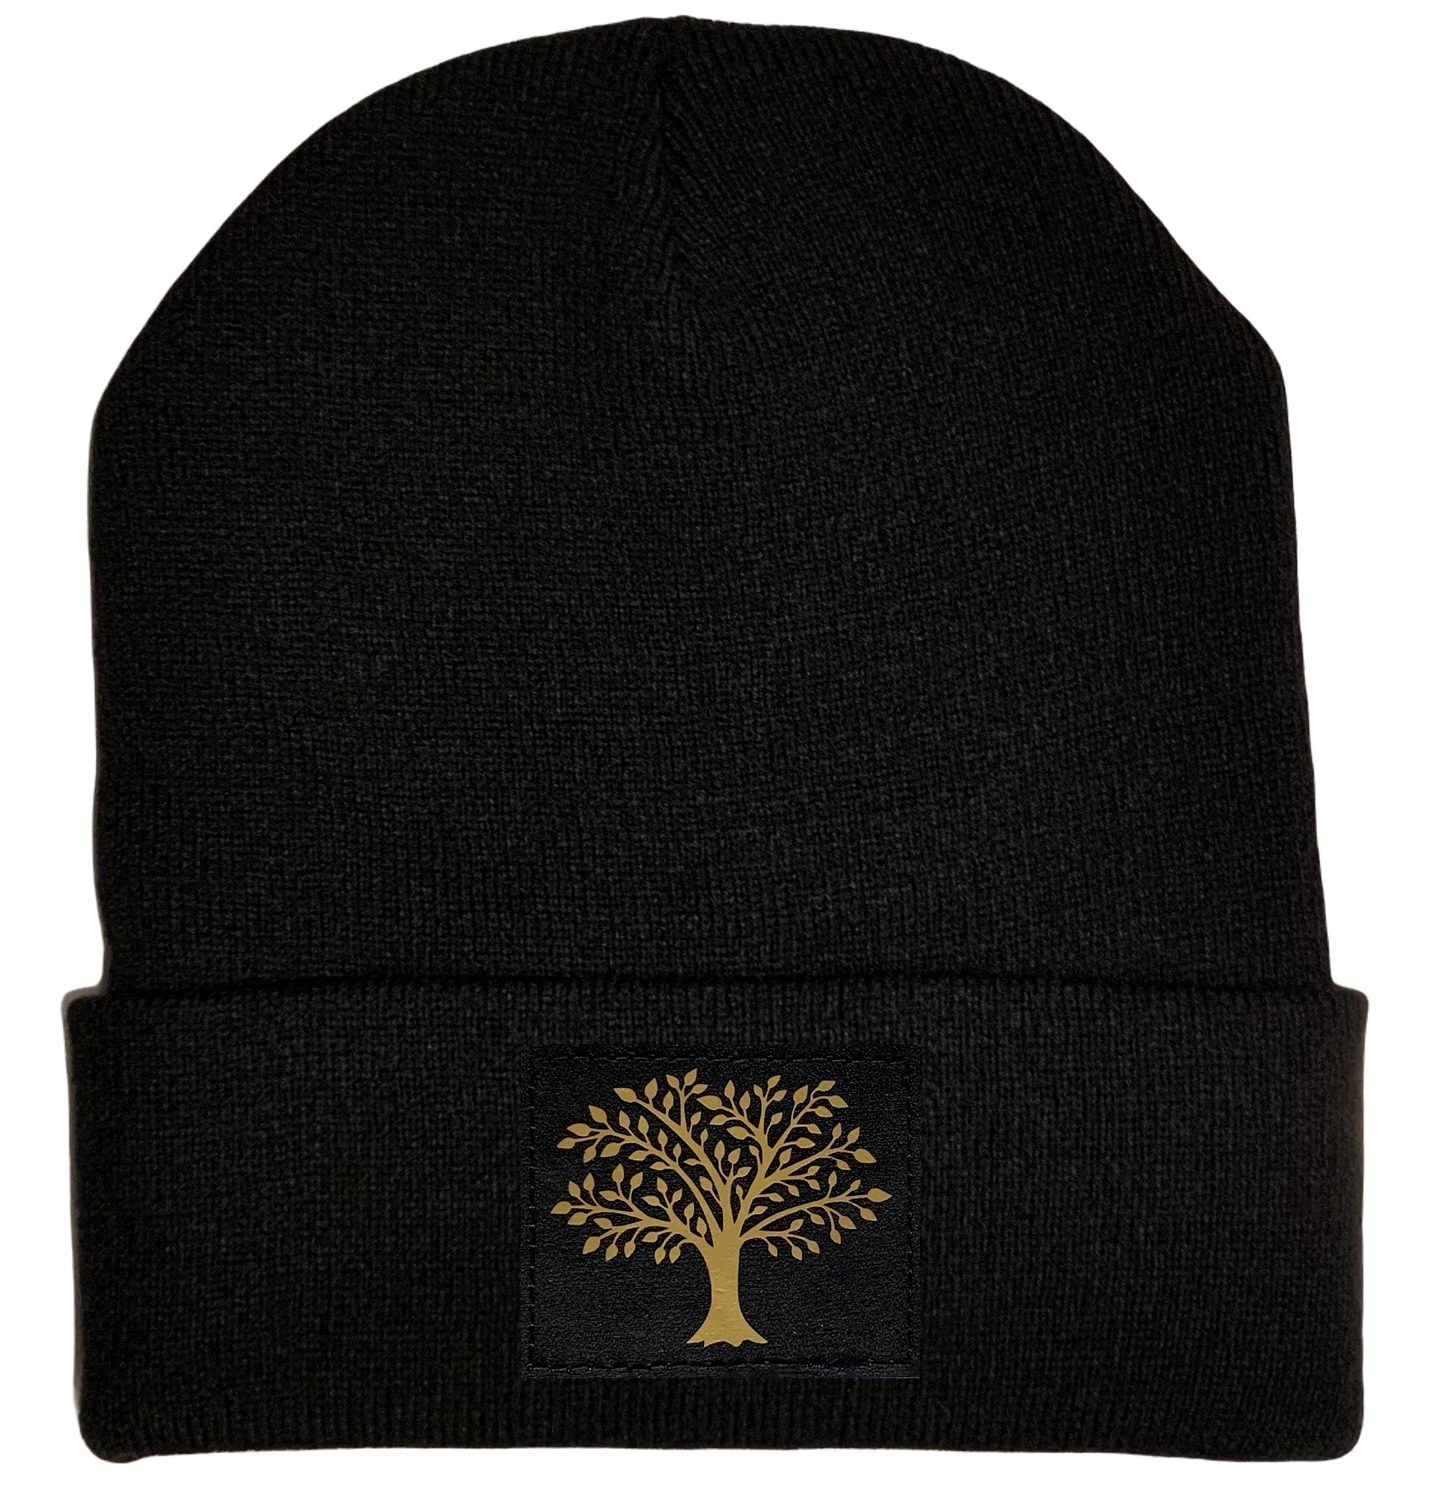 Celtic Beanie - Black cuffed w, Black and Gold Hand Made Tree of Life, Vegan Leather patch over your Third Eye buddha gear